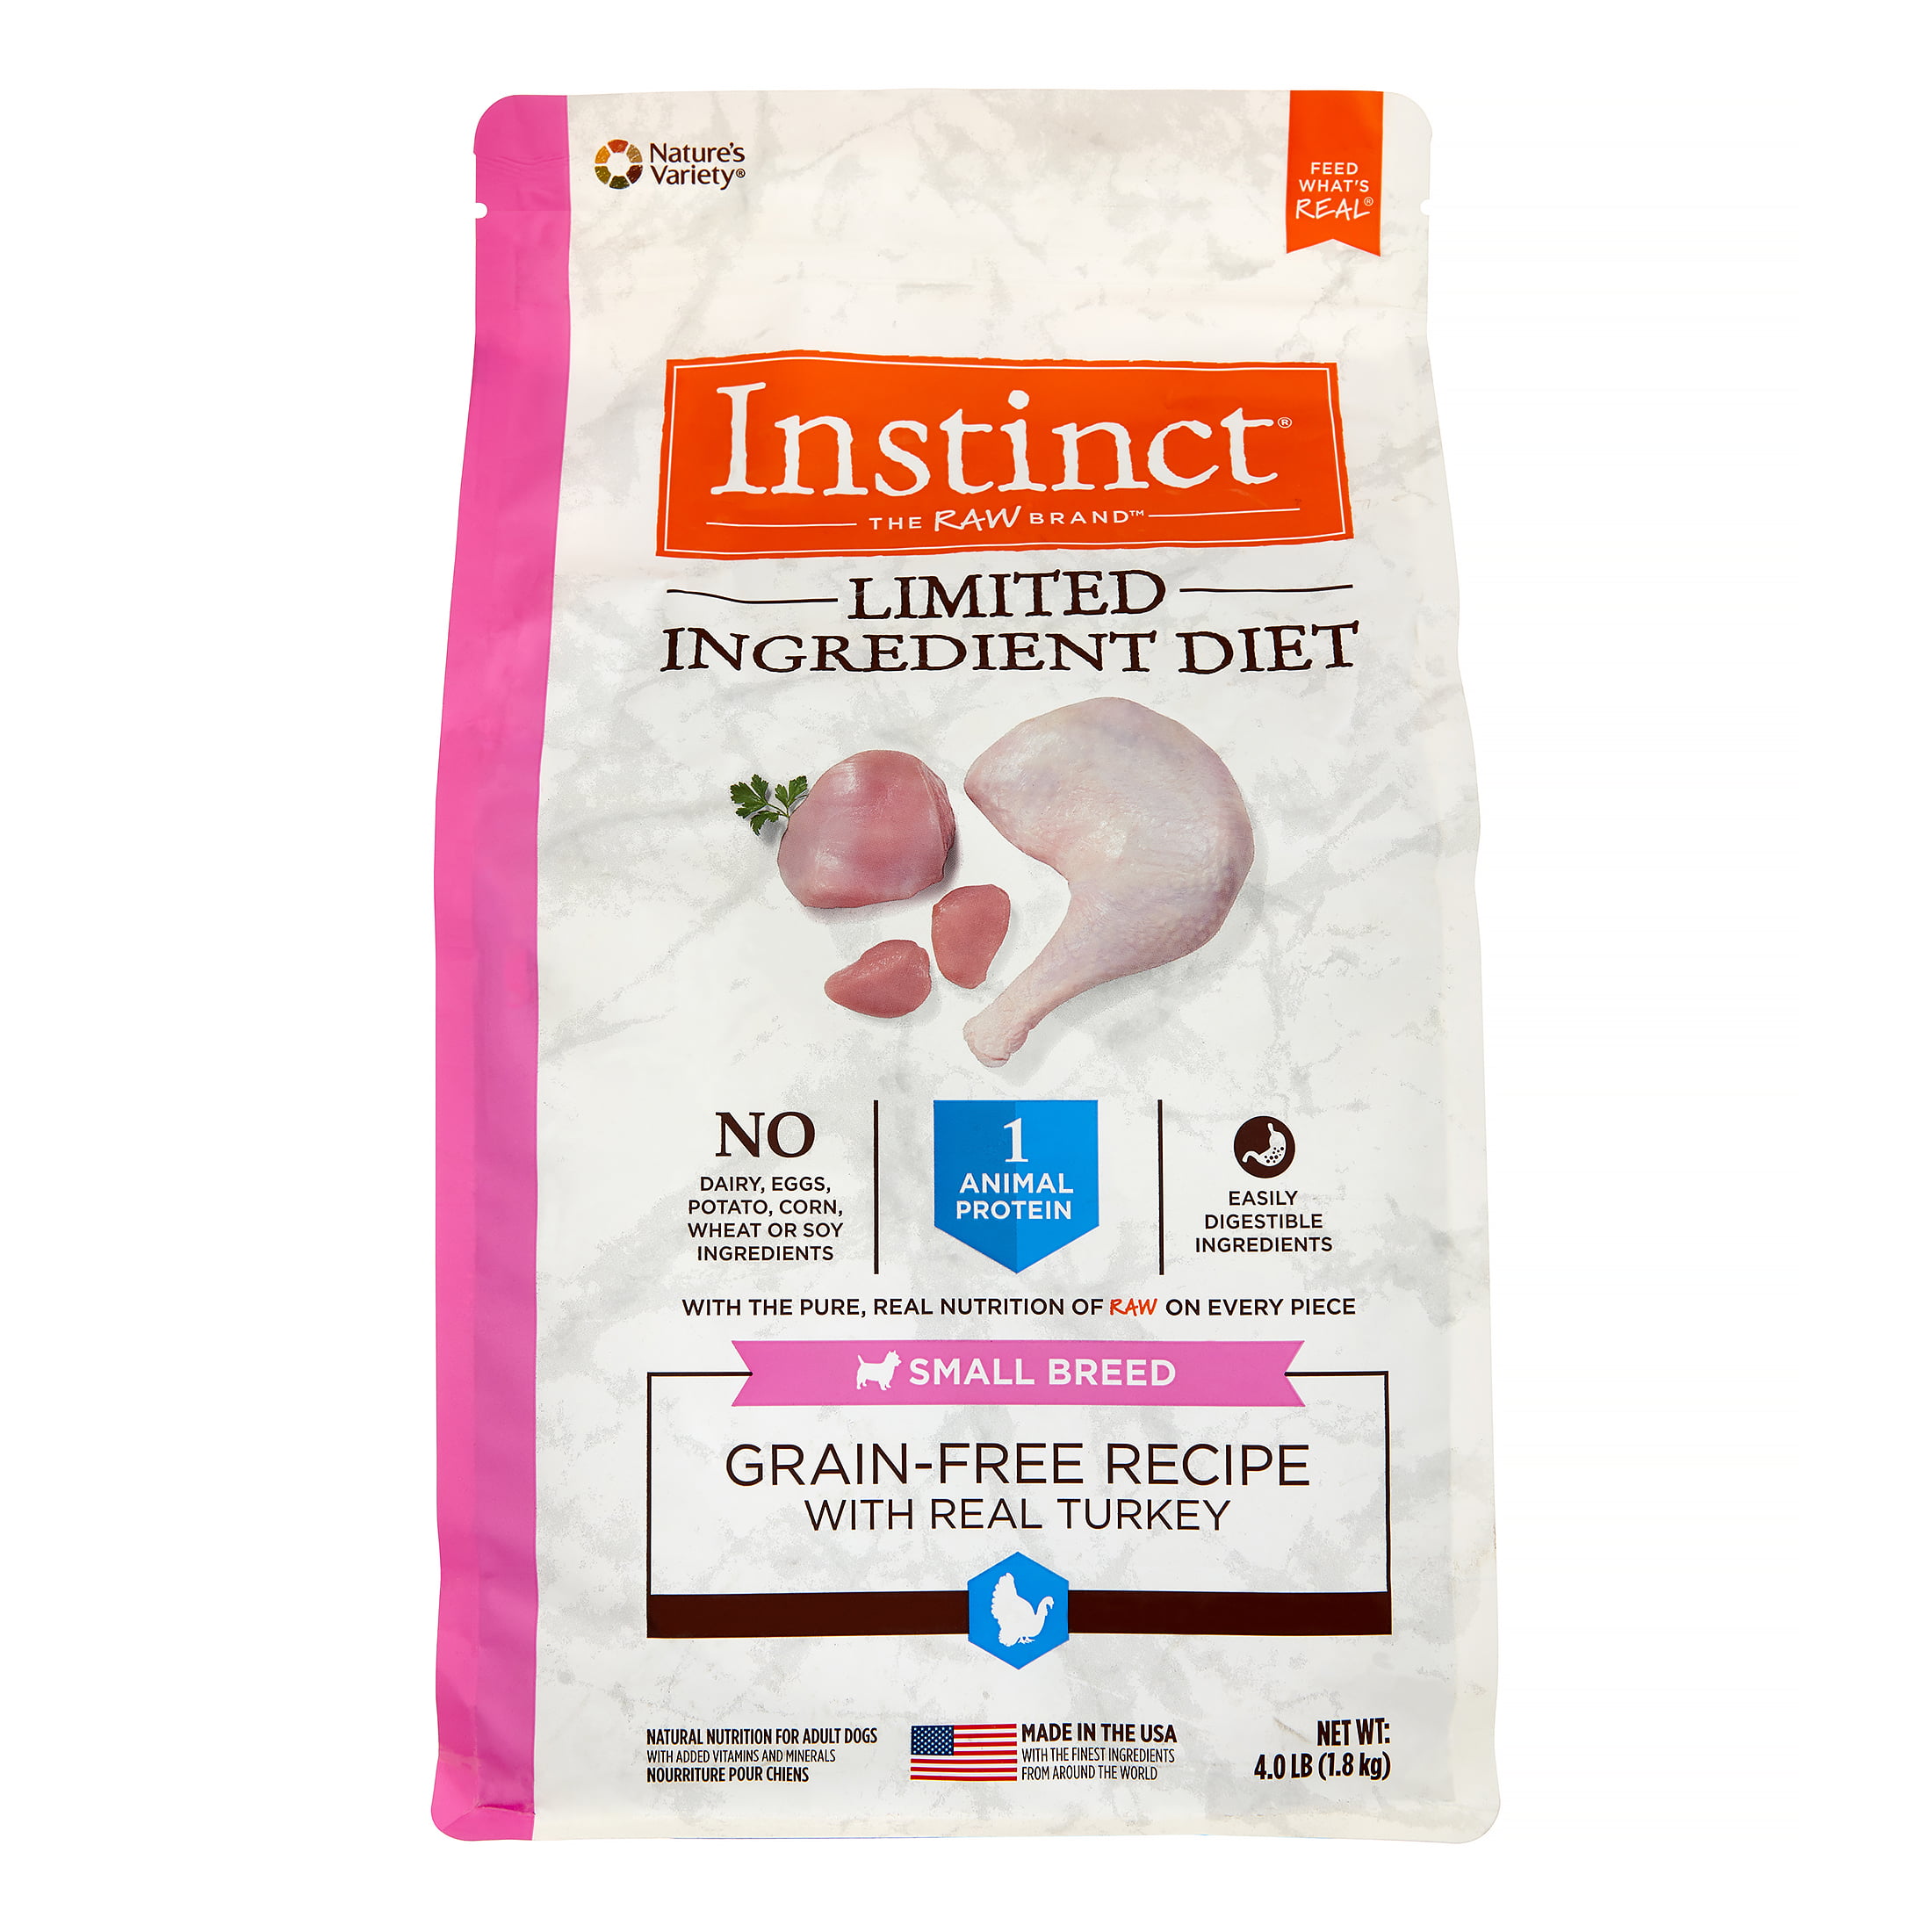 Instinct Limited Ingredient Diet Small Breed GrainFree Recipe with